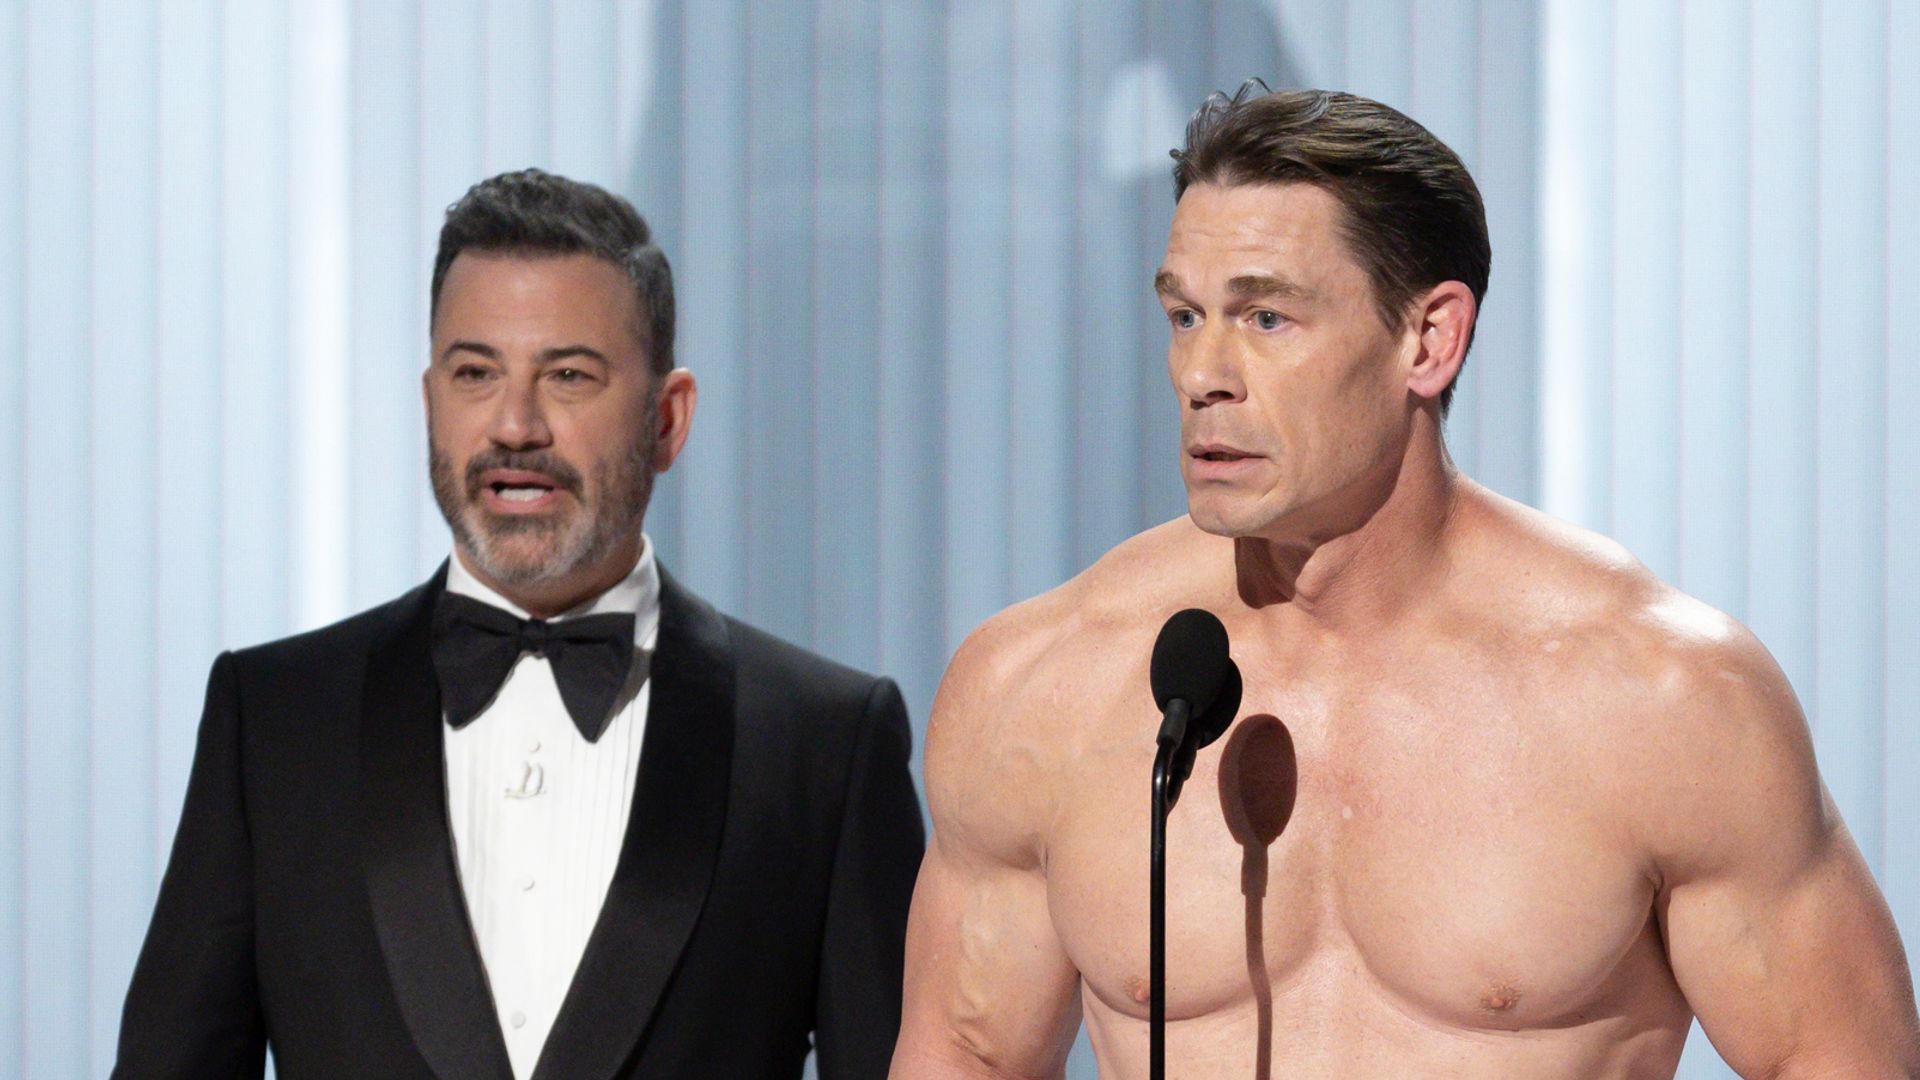 John Cena's naked Oscars stunt almost didn't happen and left people 'crying', Jimmy Kimmel tells all